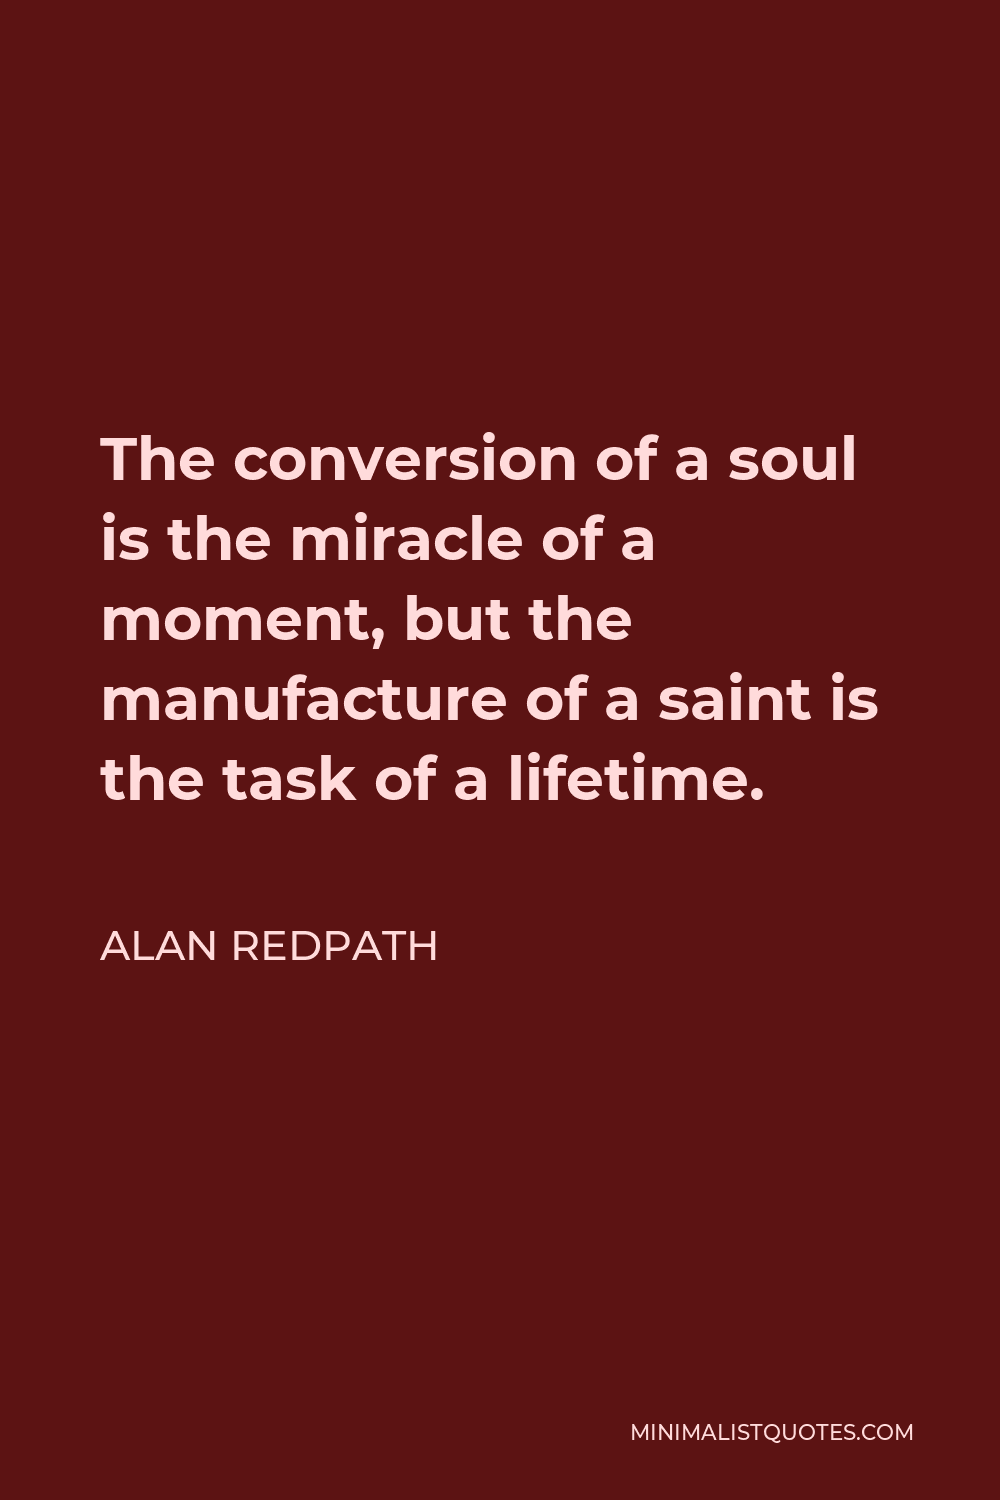 Alan Redpath Quote - The conversion of a soul is the miracle of a moment, but the manufacture of a saint is the task of a lifetime.